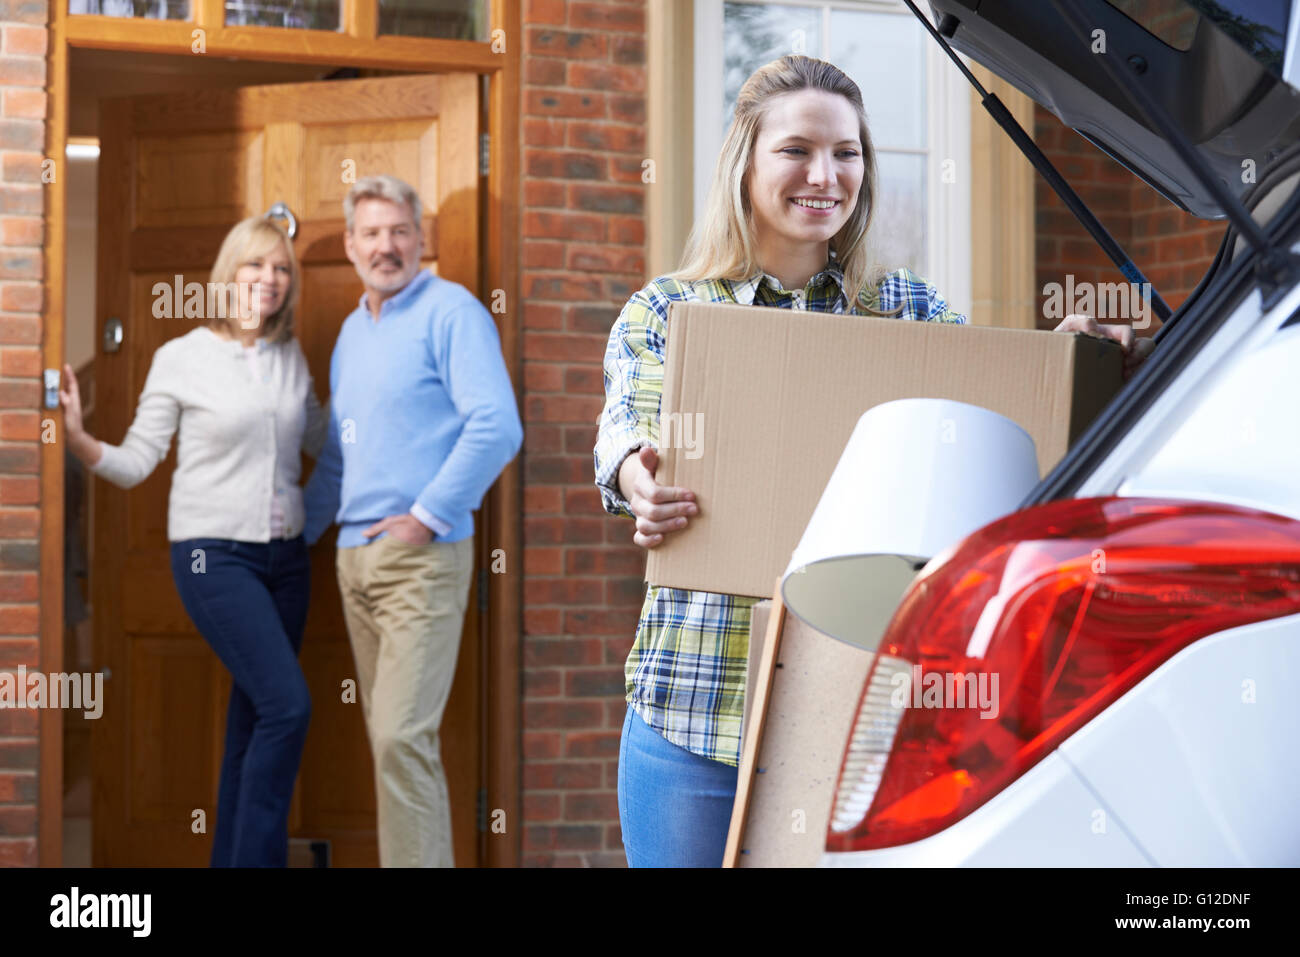 Adult Daughter Moving Out Of Parent's Home Stock Photo